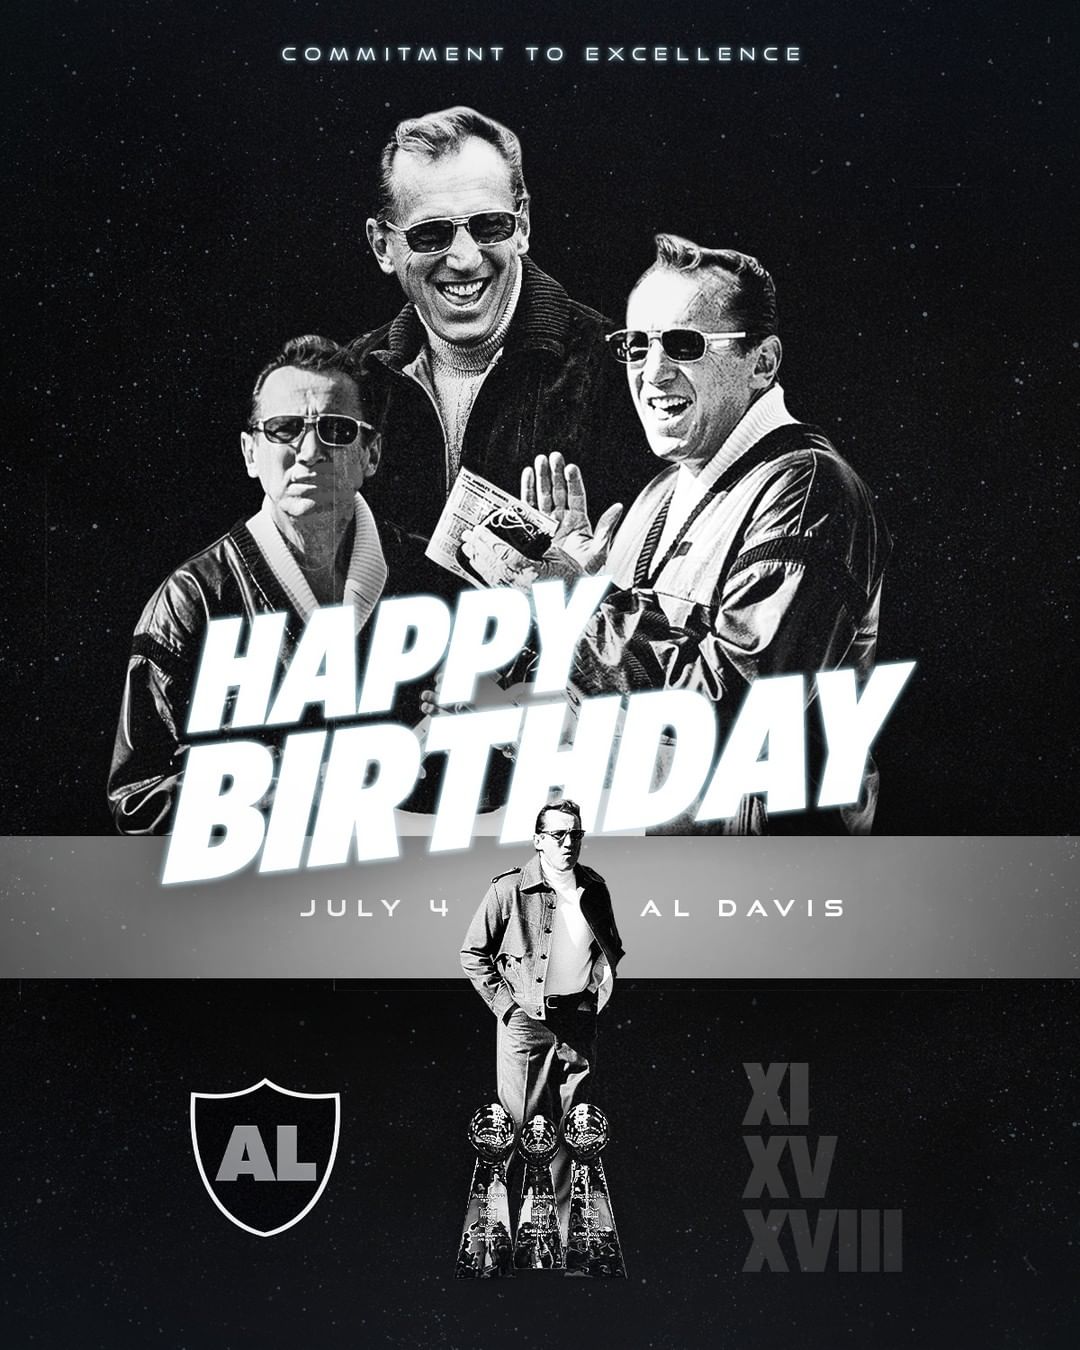 Al Davis would’ve been 93 years old today. We remember him and keep his spirit a...